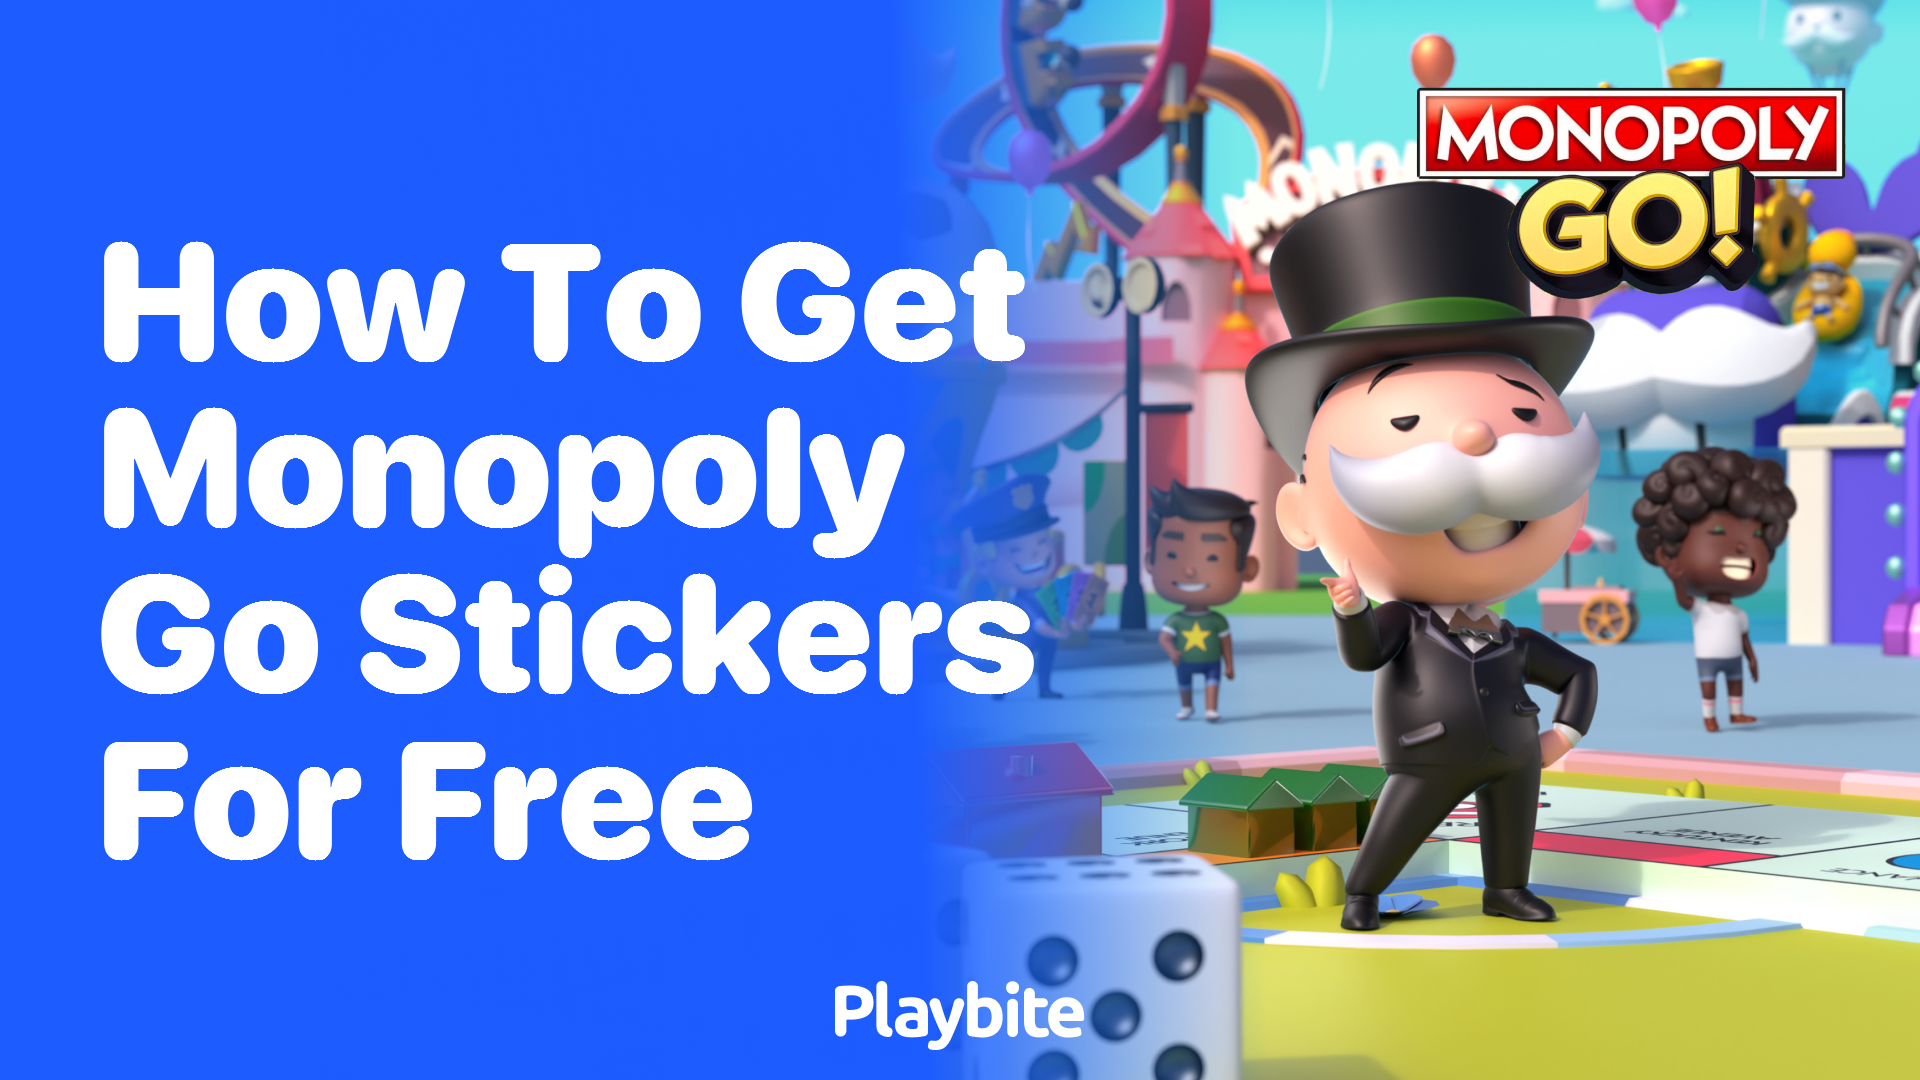 How to Get Monopoly Go Stickers for Free: A Fun Guide